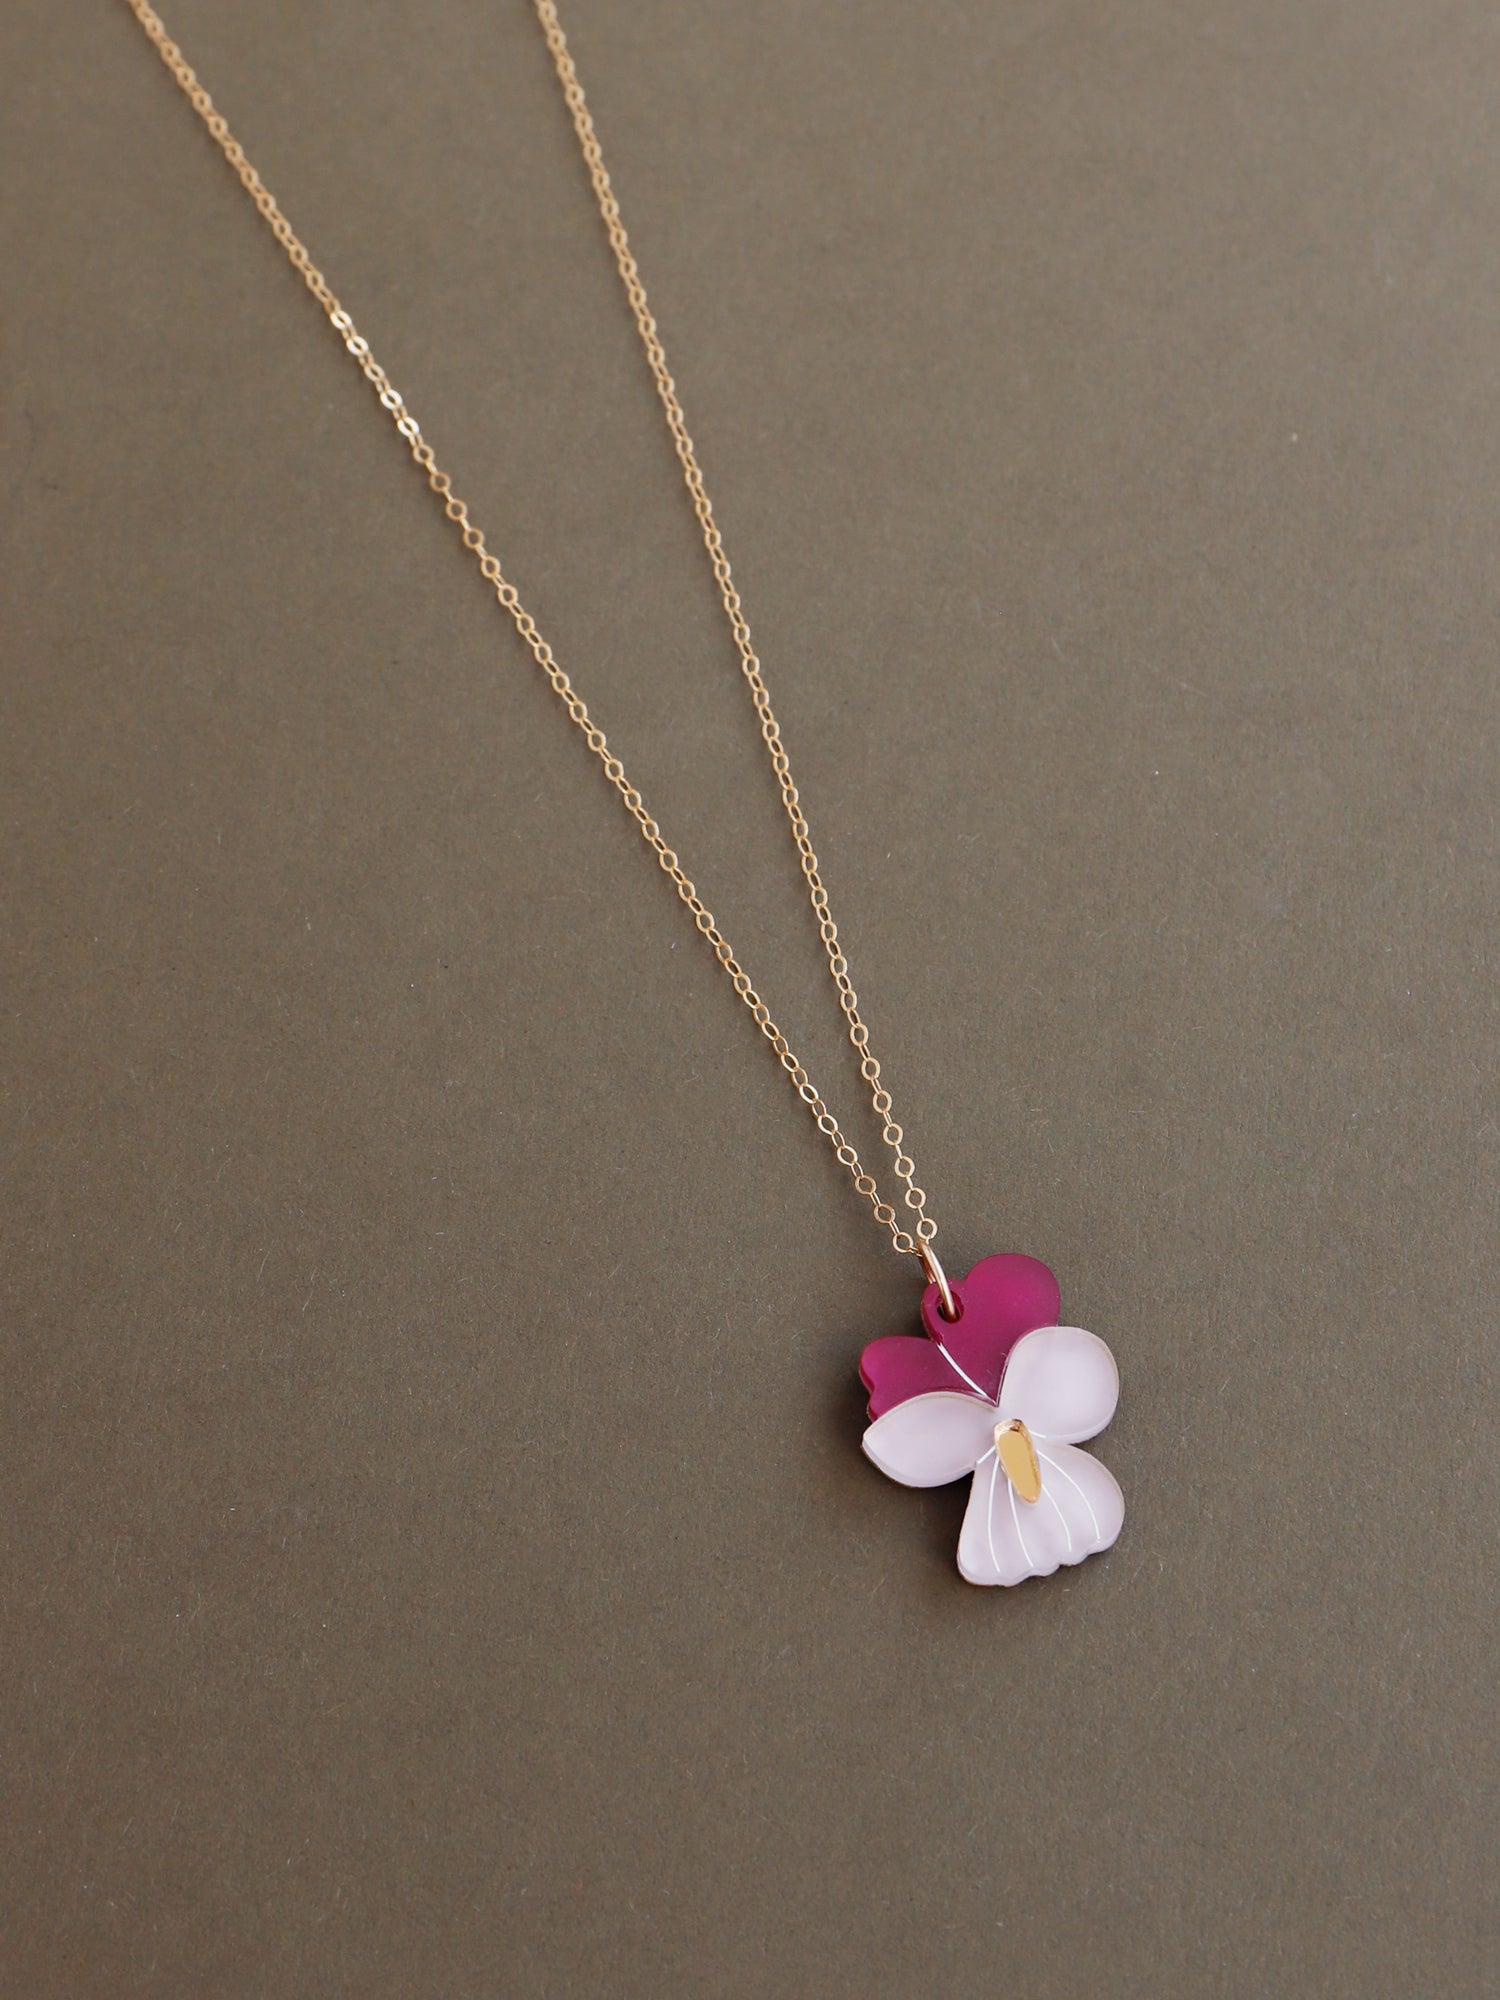 Illustrated violet flower pendant made with wood, 64% recycled acrylic and hand-inked details with 45cm 14k gold-filled chain and findings. Handmade in the UK by Wolf & Moon.